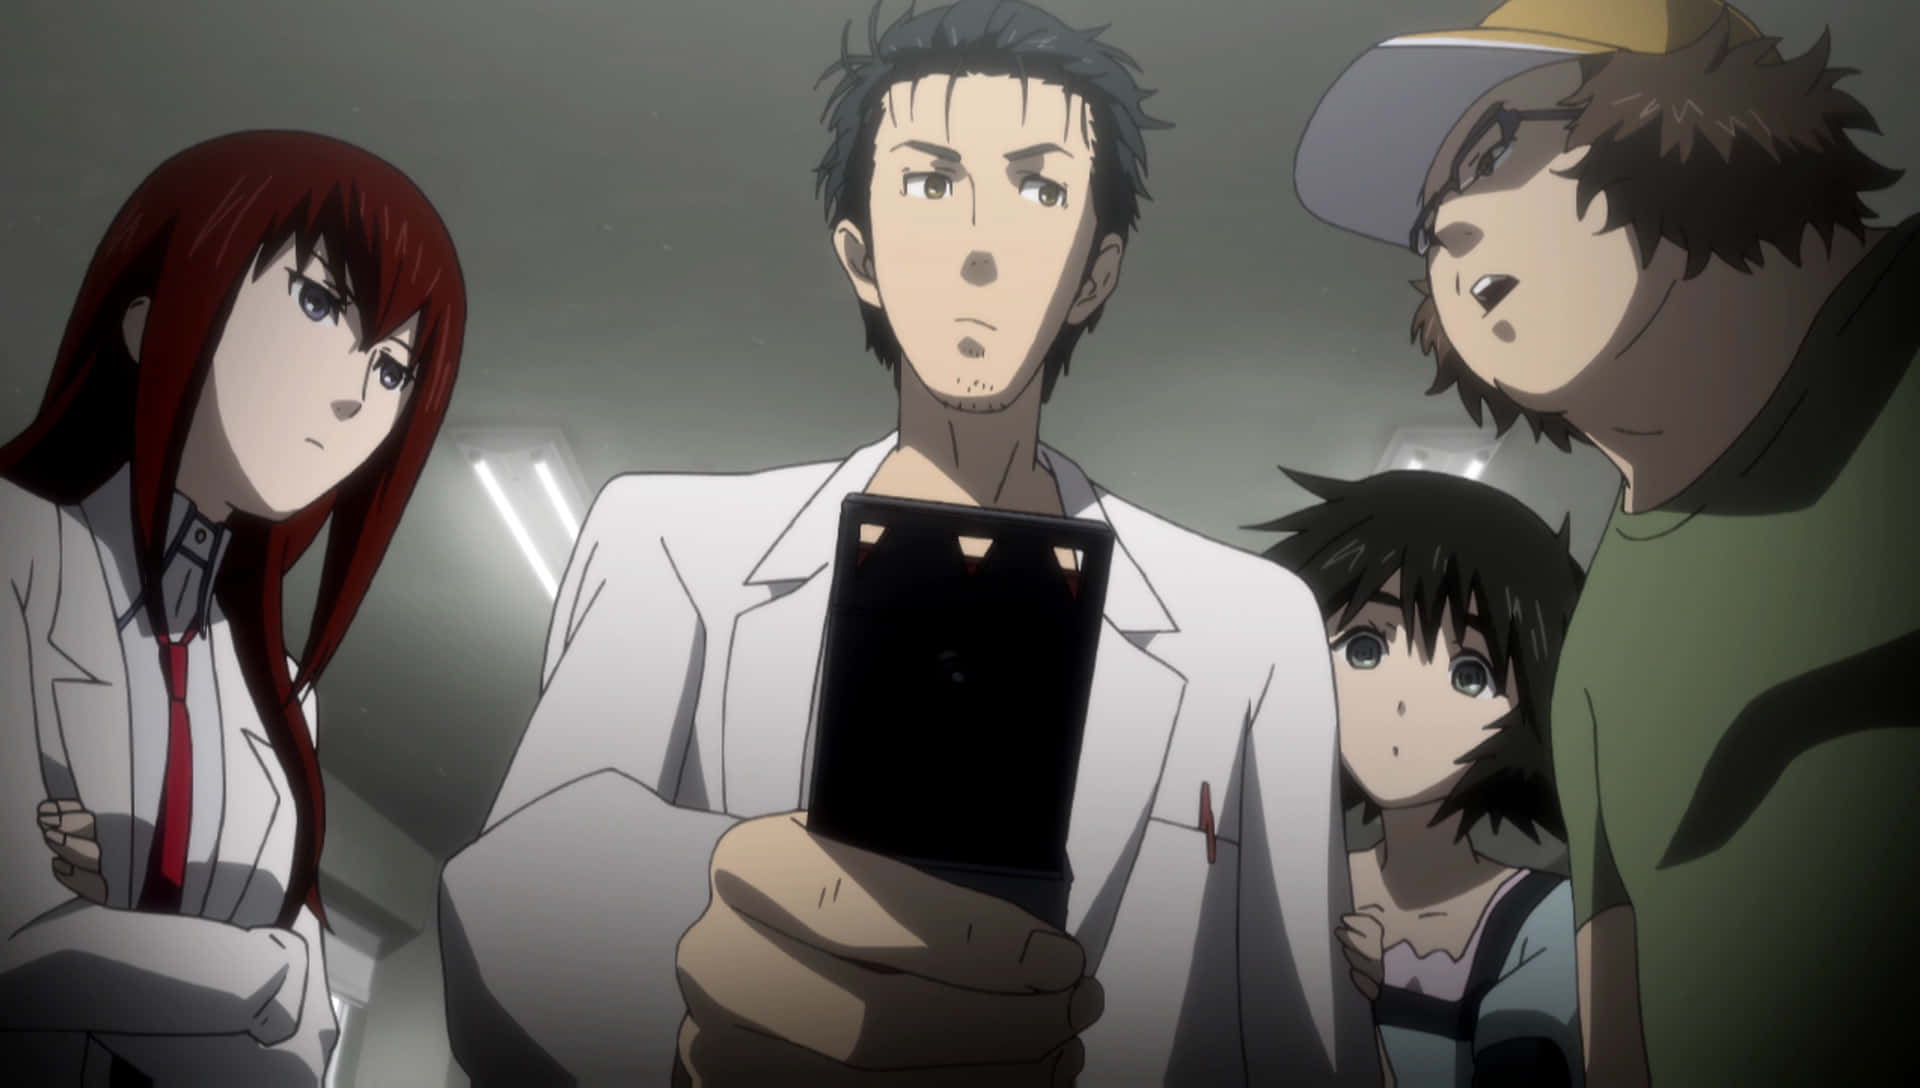 "The World is Just a Tap Away: Unlocking the Power of Steins Gate"